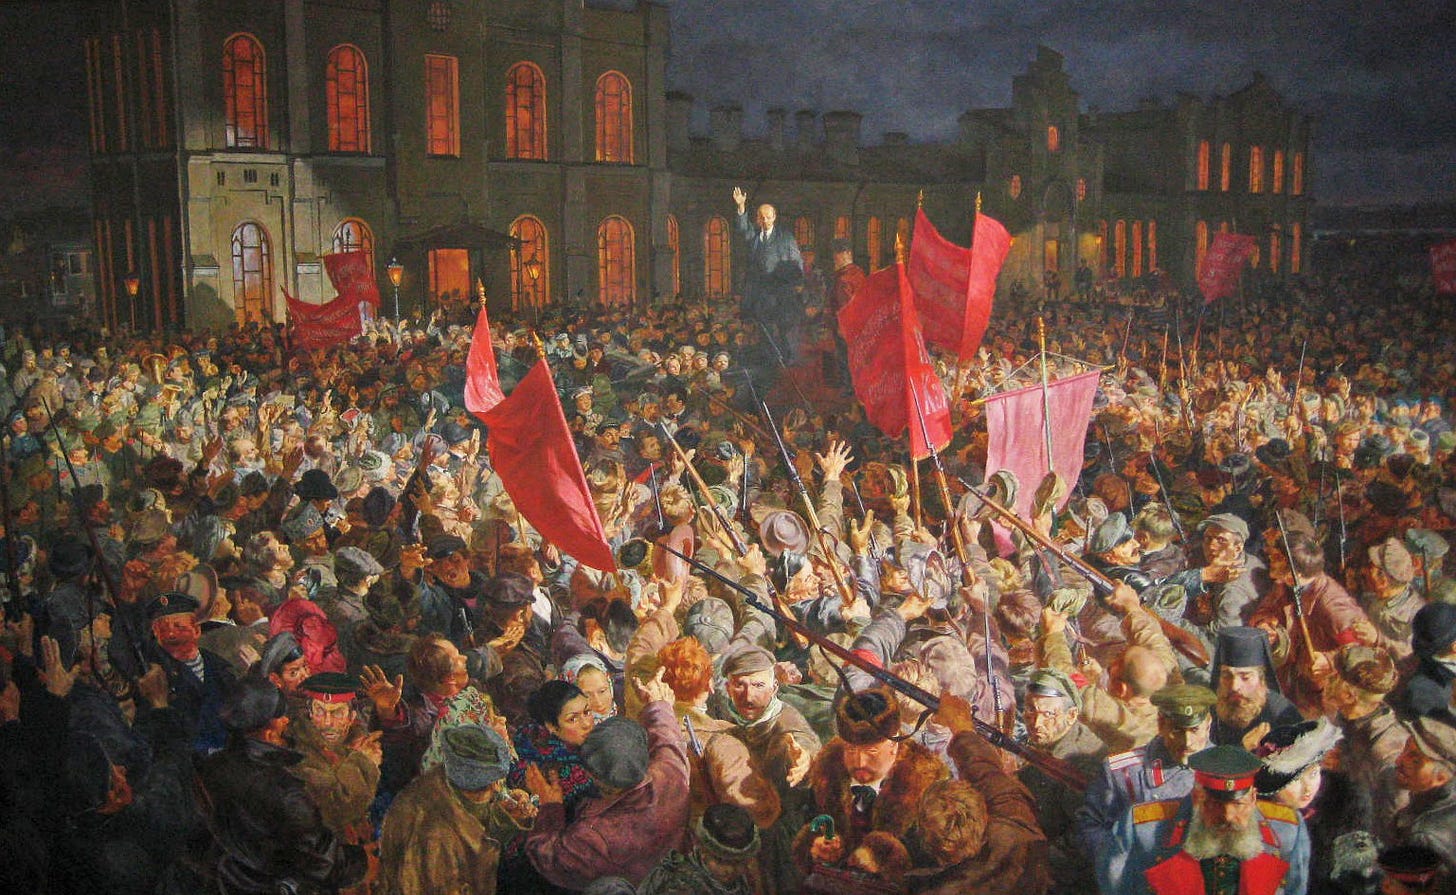 Lenin addressing a crowd in Red Square